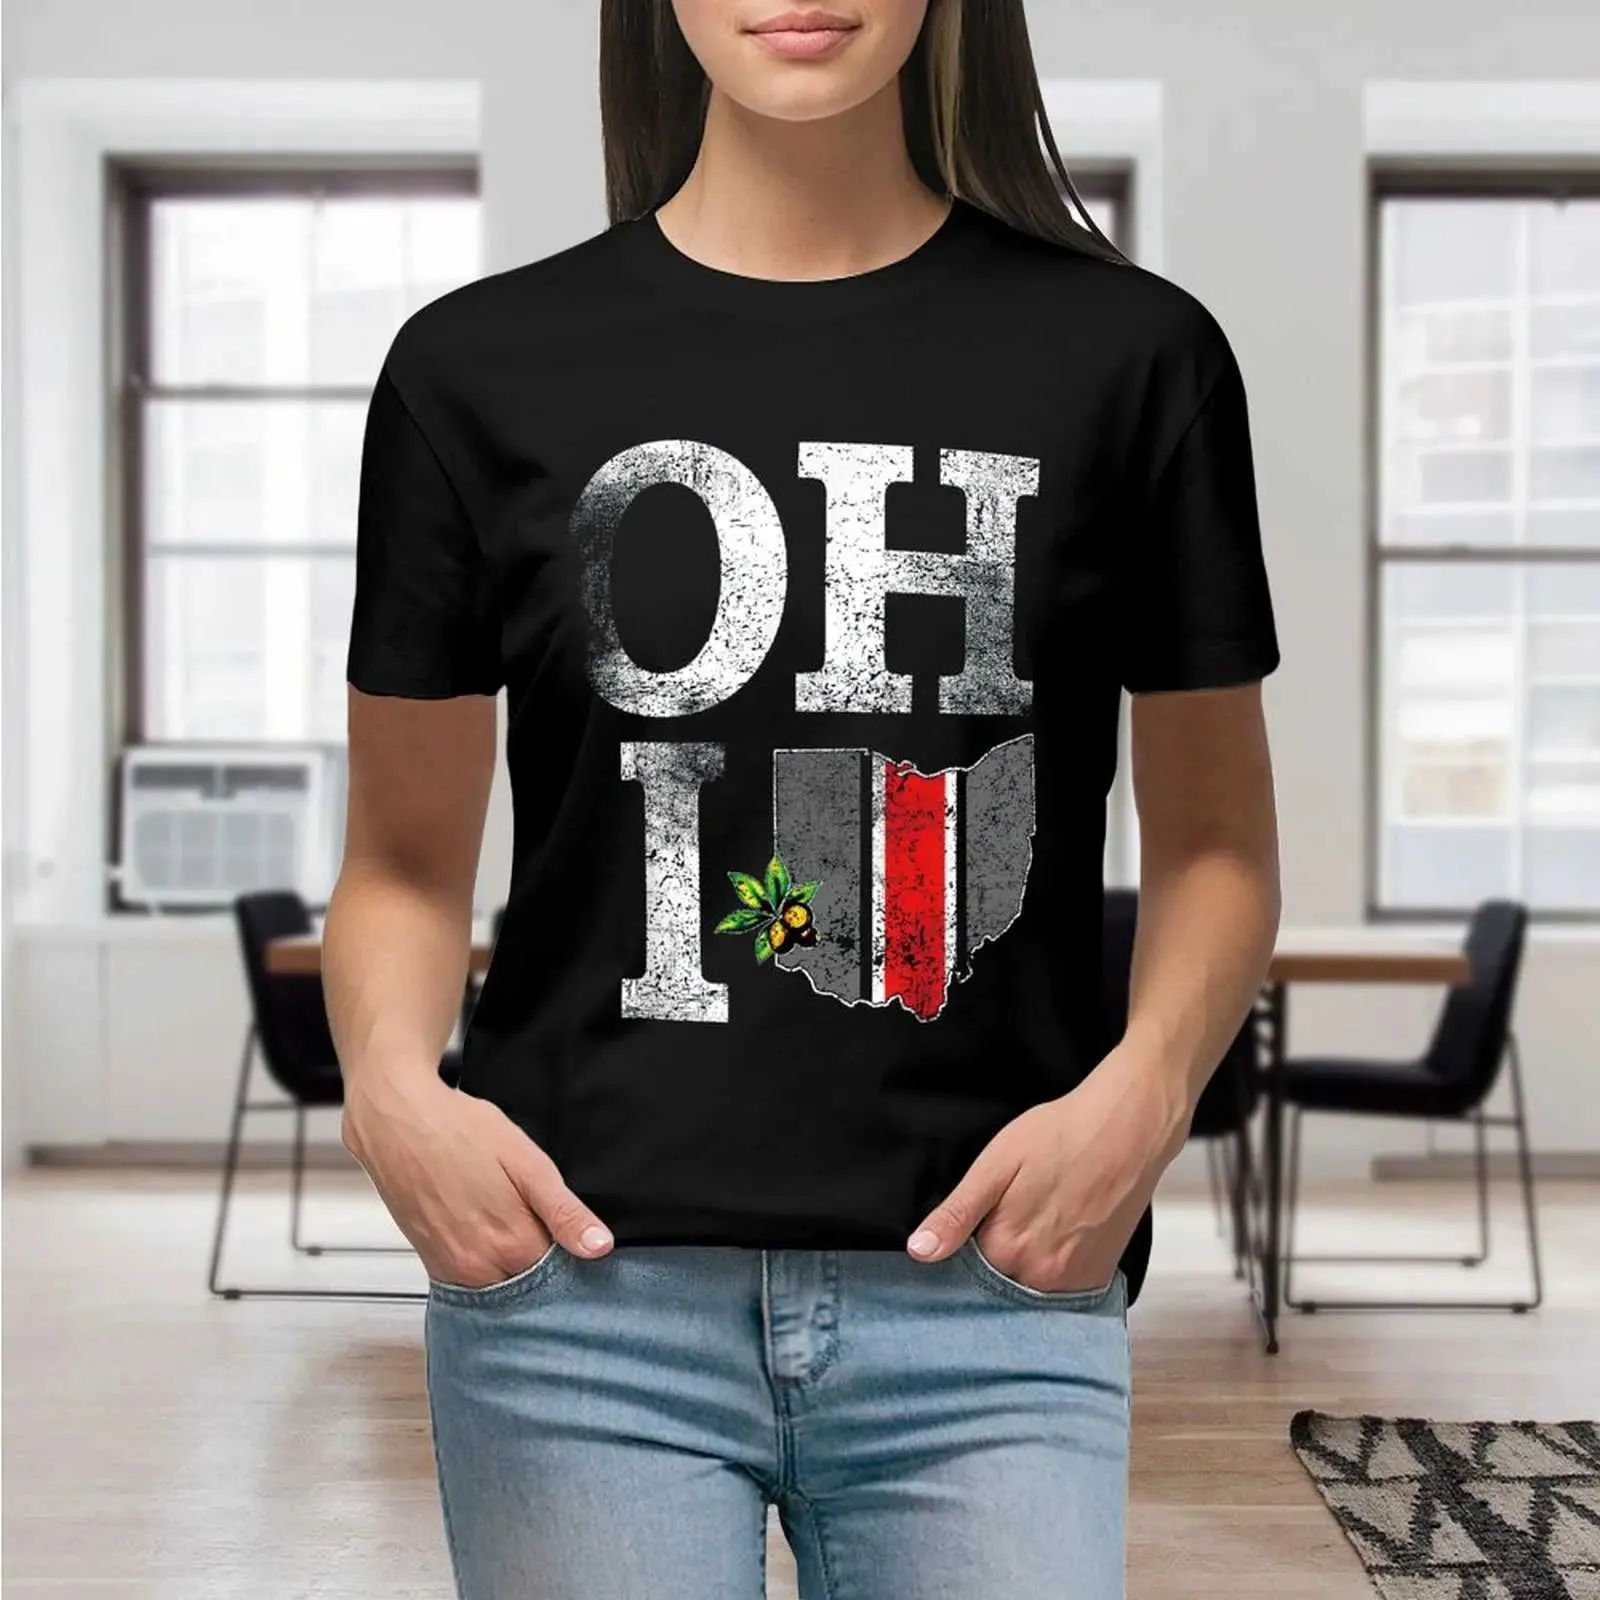 Women's T-Shirt Vintage State of Ohio Trendy Ohioan Design Shape Grunge T Shirt Graphic Shirt Casual Short Slved Female T T-Shirt Size S-4XL Y240506